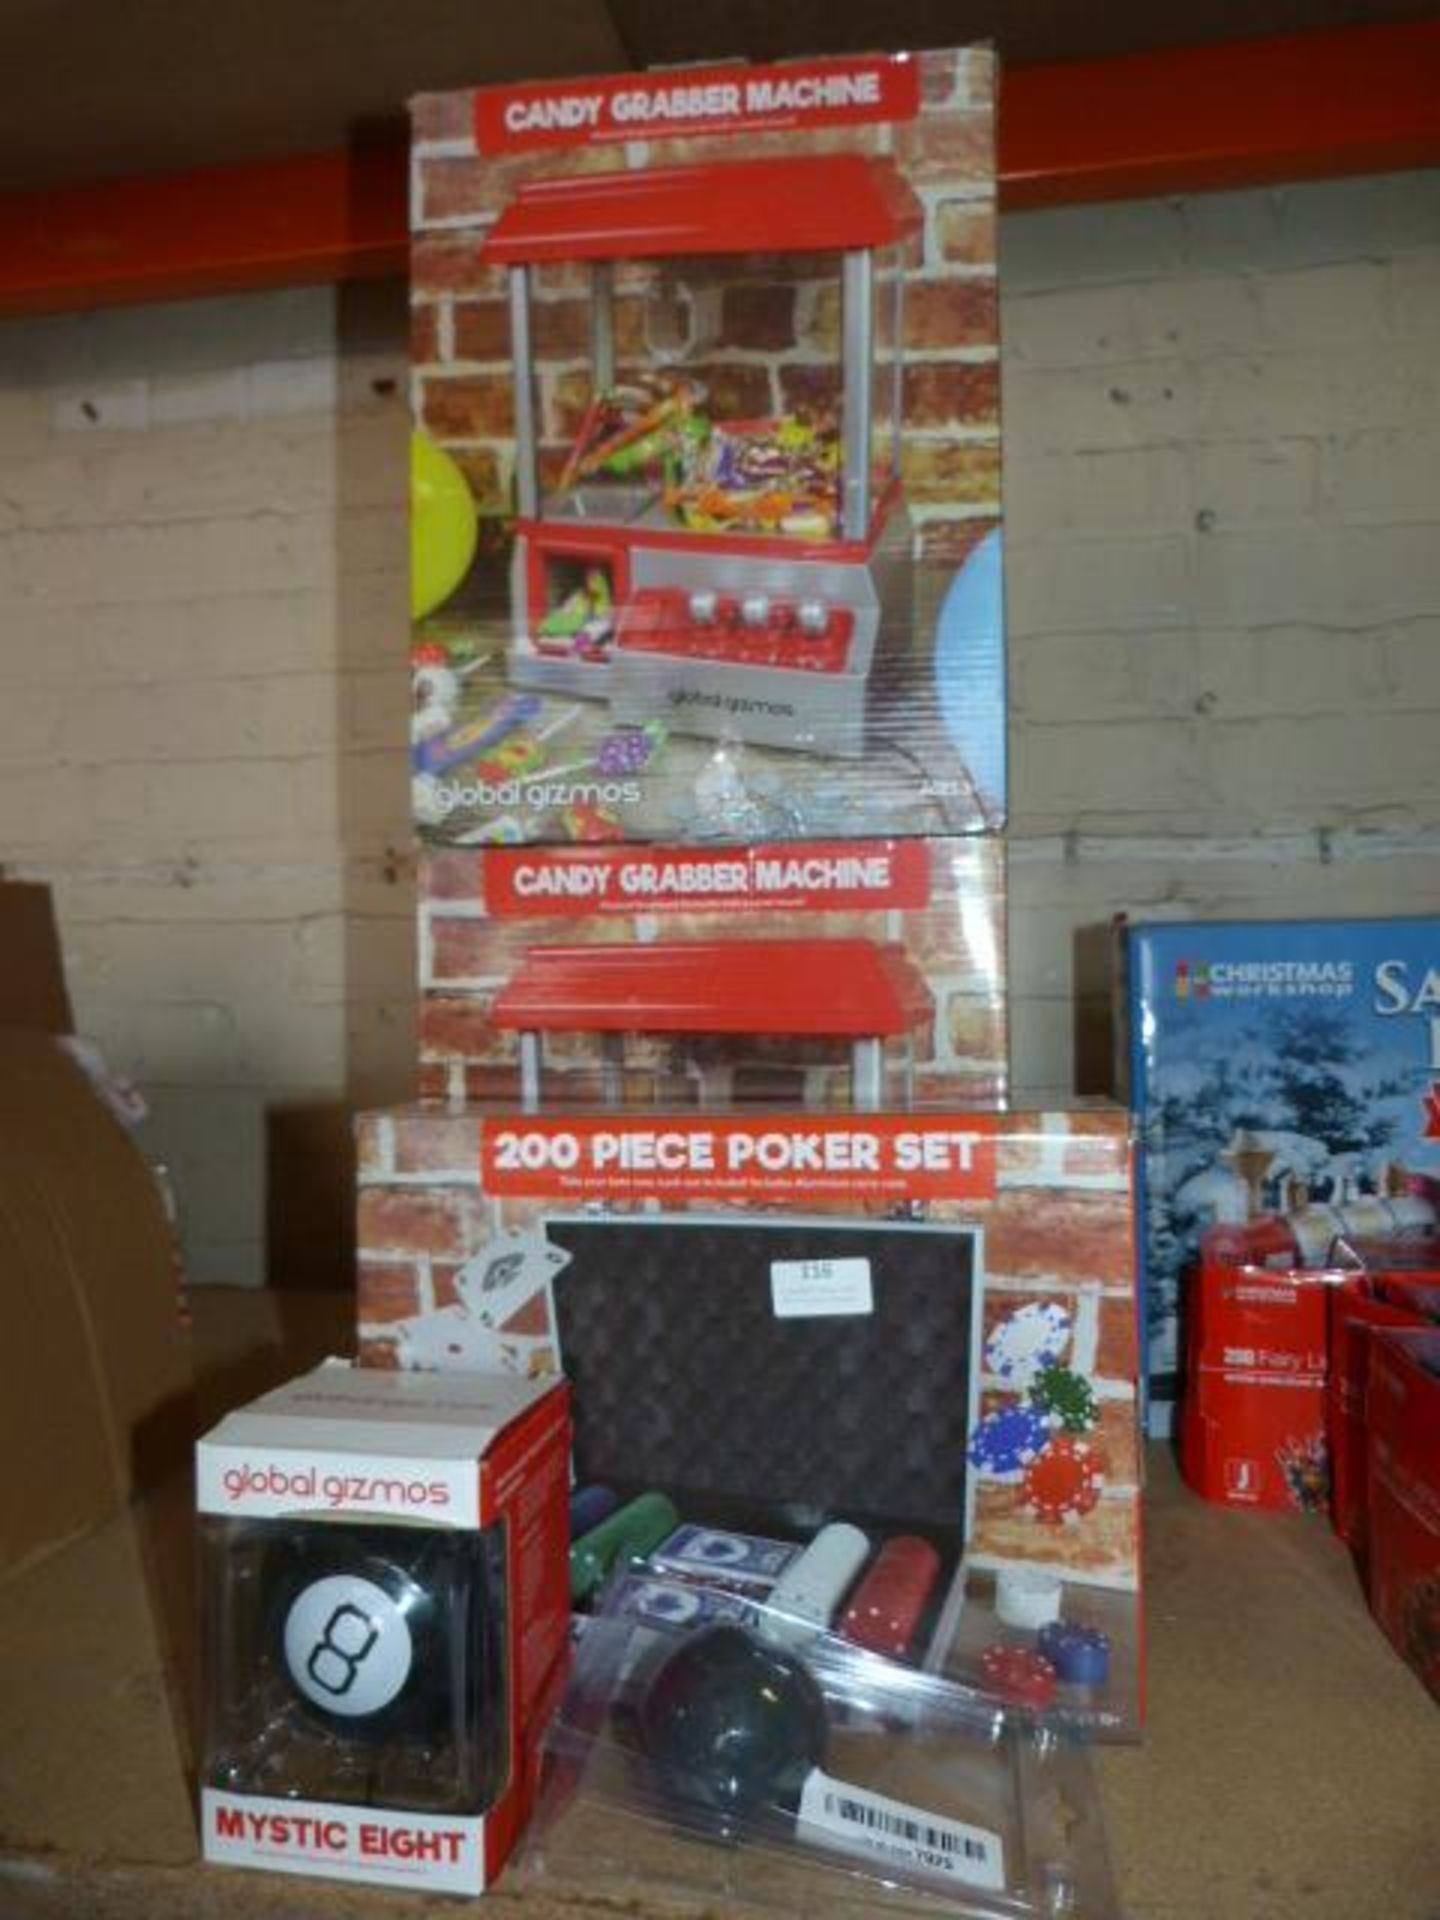 *200pc Poker Set, Two Candy Grabber Machines and T